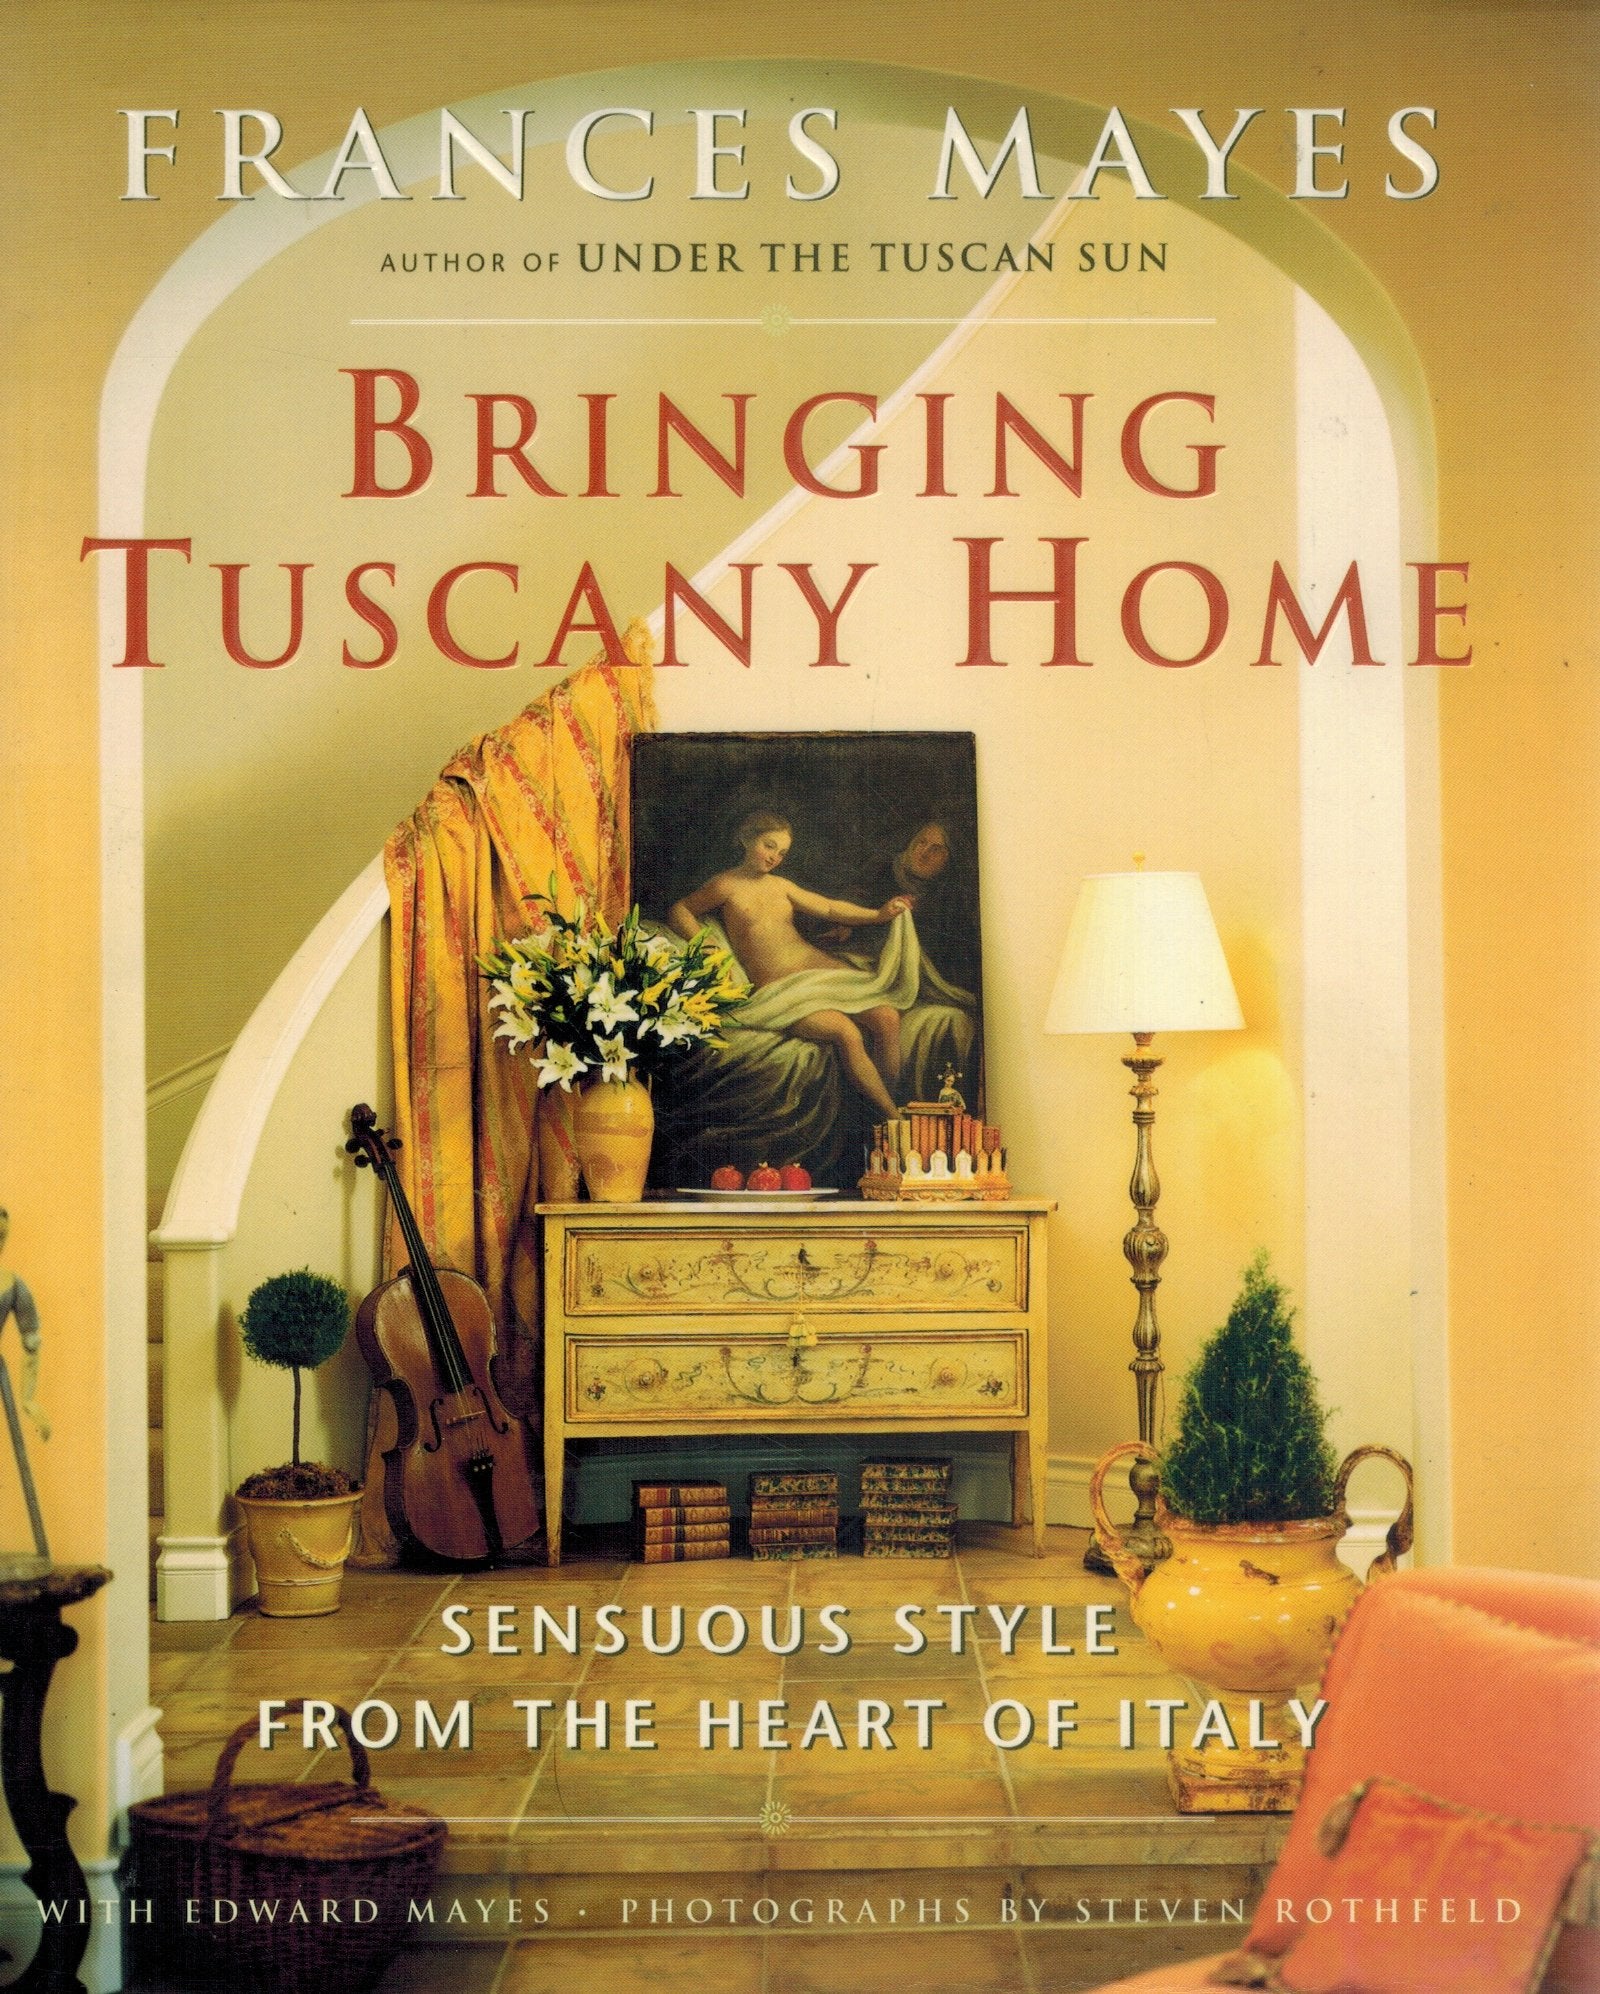 Bringing Tuscany Home  Sensuous Style From the Heart of Italy  by Mayes, Frances & Edward Mayes & Steven Rothfeld